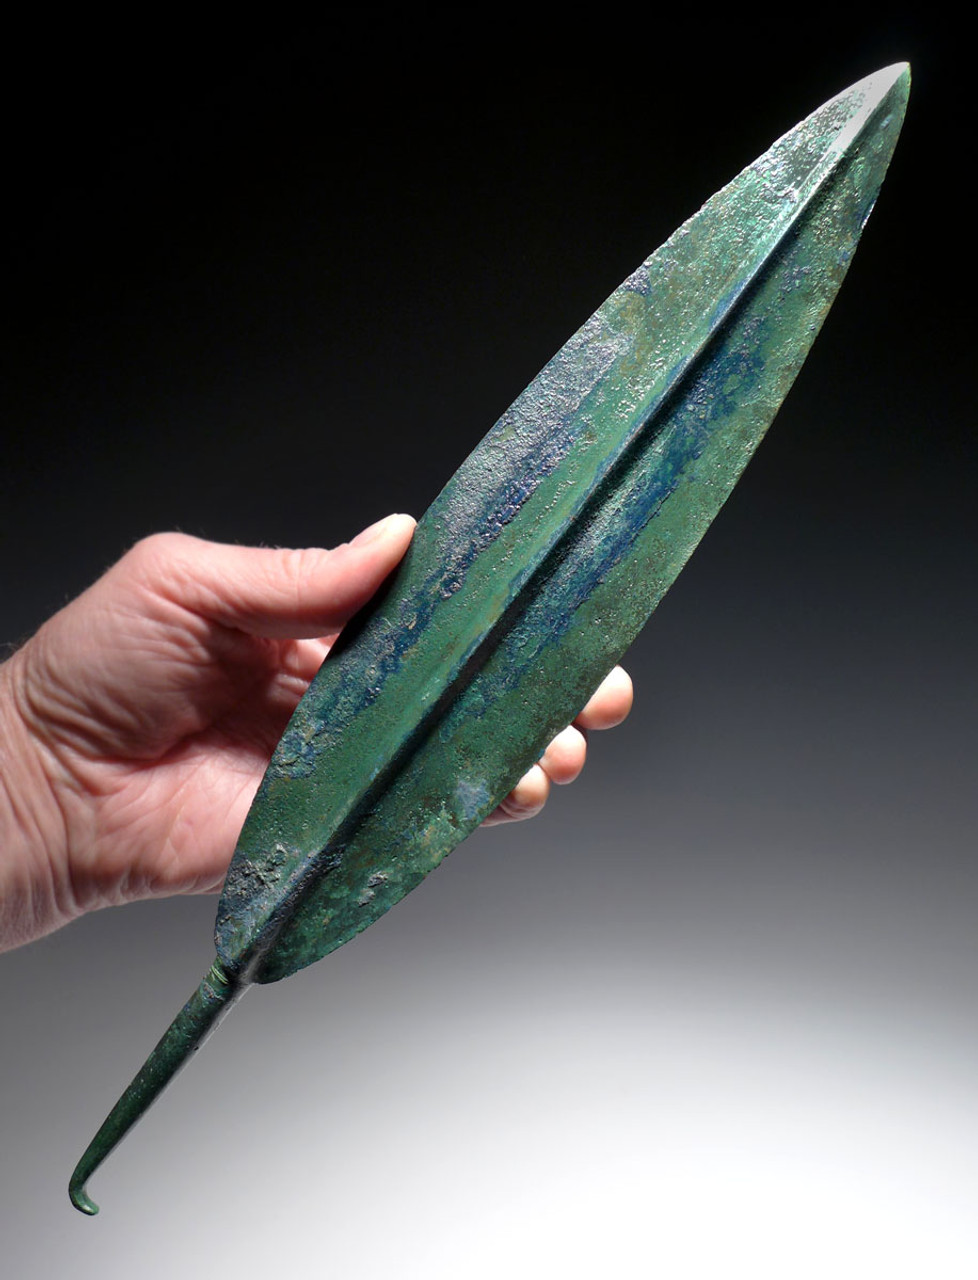 GIANT MUSEUM-CLASS ANCIENT SUMERIAN BRONZE PHALANX PIKE SPEARHEAD FROM THE NEAR EAST  *LUR279